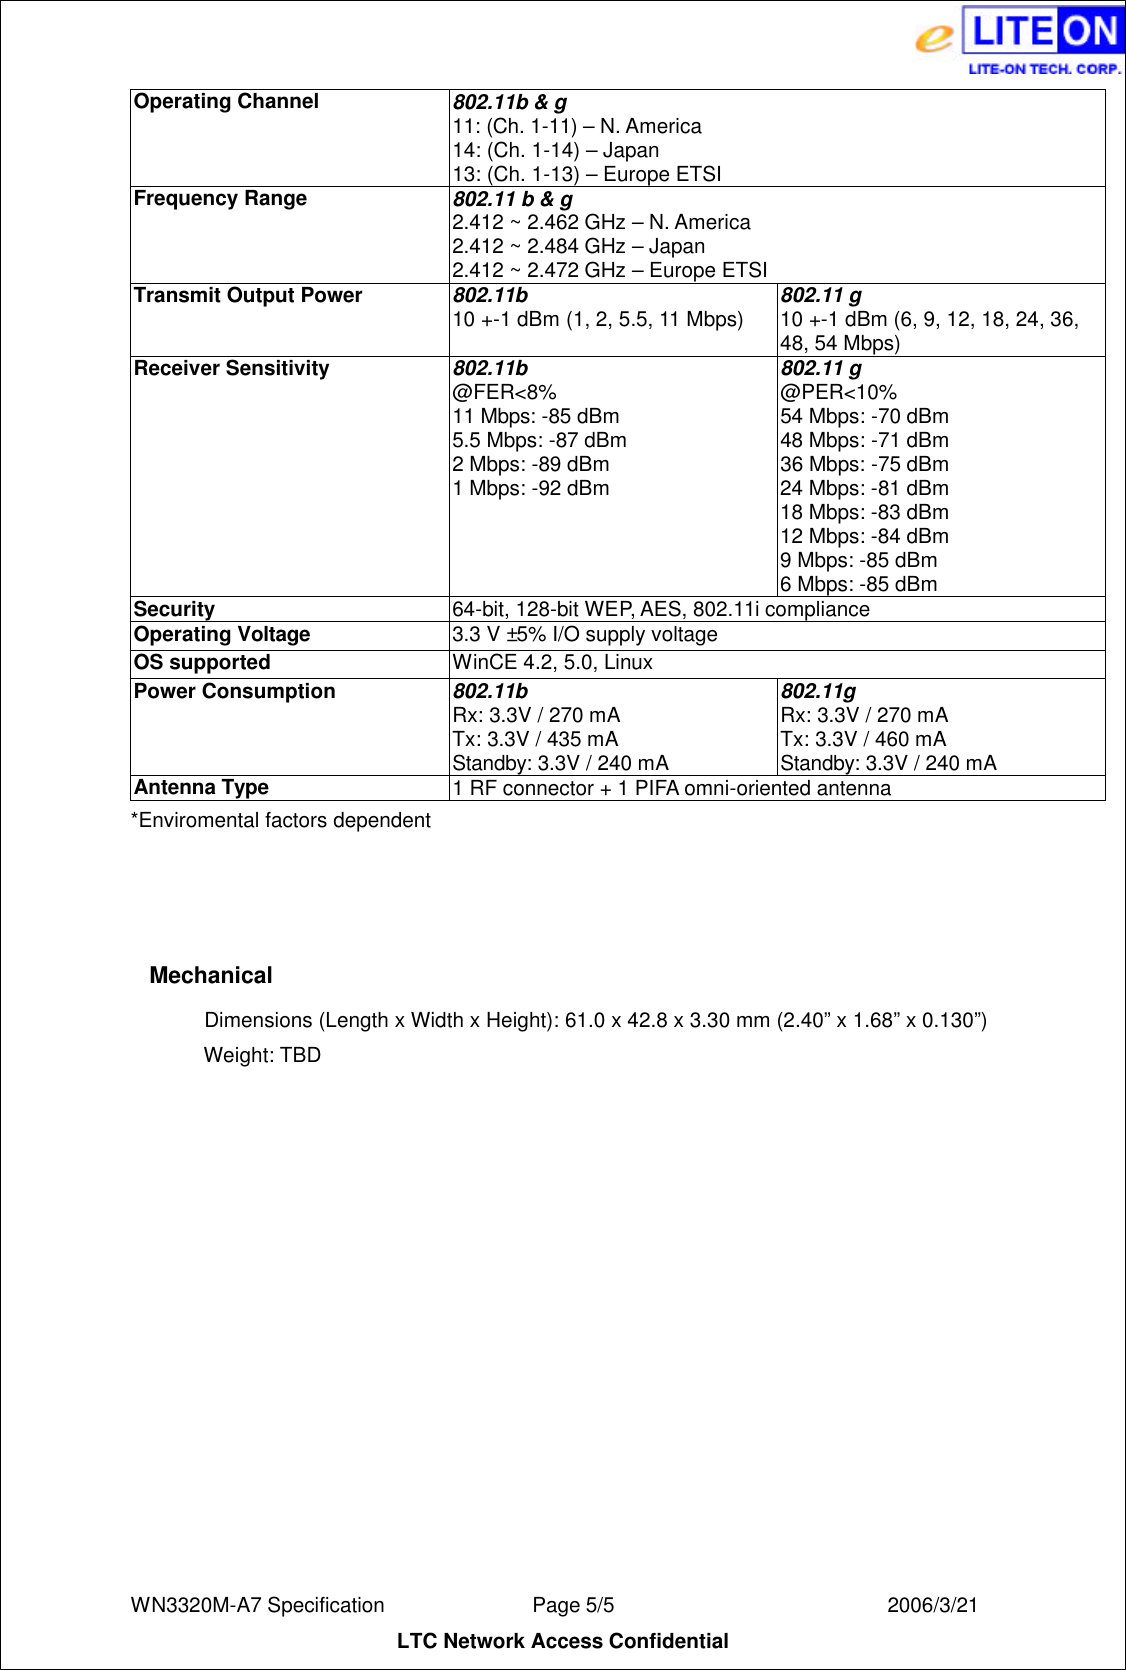  WN3320M-A7 Specification               Page 5/5                          2006/3/21 LTC Network Access Confidential Operating Channel  802.11b &amp; g 11: (Ch. 1-11) – N. America 14: (Ch. 1-14) – Japan 13: (Ch. 1-13) – Europe ETSI Frequency Range    802.11 b &amp; g 2.412 ~ 2.462 GHz – N. America 2.412 ~ 2.484 GHz – Japan 2.412 ~ 2.472 GHz – Europe ETSI Transmit Output Power   802.11b 10 +-1 dBm (1, 2, 5.5, 11 Mbps) 802.11 g 10 +-1 dBm (6, 9, 12, 18, 24, 36, 48, 54 Mbps) Receiver Sensitivity  802.11b @FER&lt;8% 11 Mbps: -85 dBm 5.5 Mbps: -87 dBm 2 Mbps: -89 dBm 1 Mbps: -92 dBm 802.11 g @PER&lt;10% 54 Mbps: -70 dBm 48 Mbps: -71 dBm 36 Mbps: -75 dBm 24 Mbps: -81 dBm 18 Mbps: -83 dBm 12 Mbps: -84 dBm 9 Mbps: -85 dBm 6 Mbps: -85 dBm Security 64-bit, 128-bit WEP, AES, 802.11i compliance Operating Voltage 3.3 V ±5% I/O supply voltage OS supported WinCE 4.2, 5.0, Linux Power Consumption 802.11b Rx: 3.3V / 270 mA Tx: 3.3V / 435 mA Standby: 3.3V / 240 mA 802.11g Rx: 3.3V / 270 mA Tx: 3.3V / 460 mA Standby: 3.3V / 240 mA Antenna Type 1 RF connector + 1 PIFA omni-oriented antenna *Enviromental factors dependent   Mechanical Dimensions (Length x Width x Height):  61.0 x 42.8 x 3.30 mm (2.40” x 1.68” x 0.130”)  Weight: TBD 